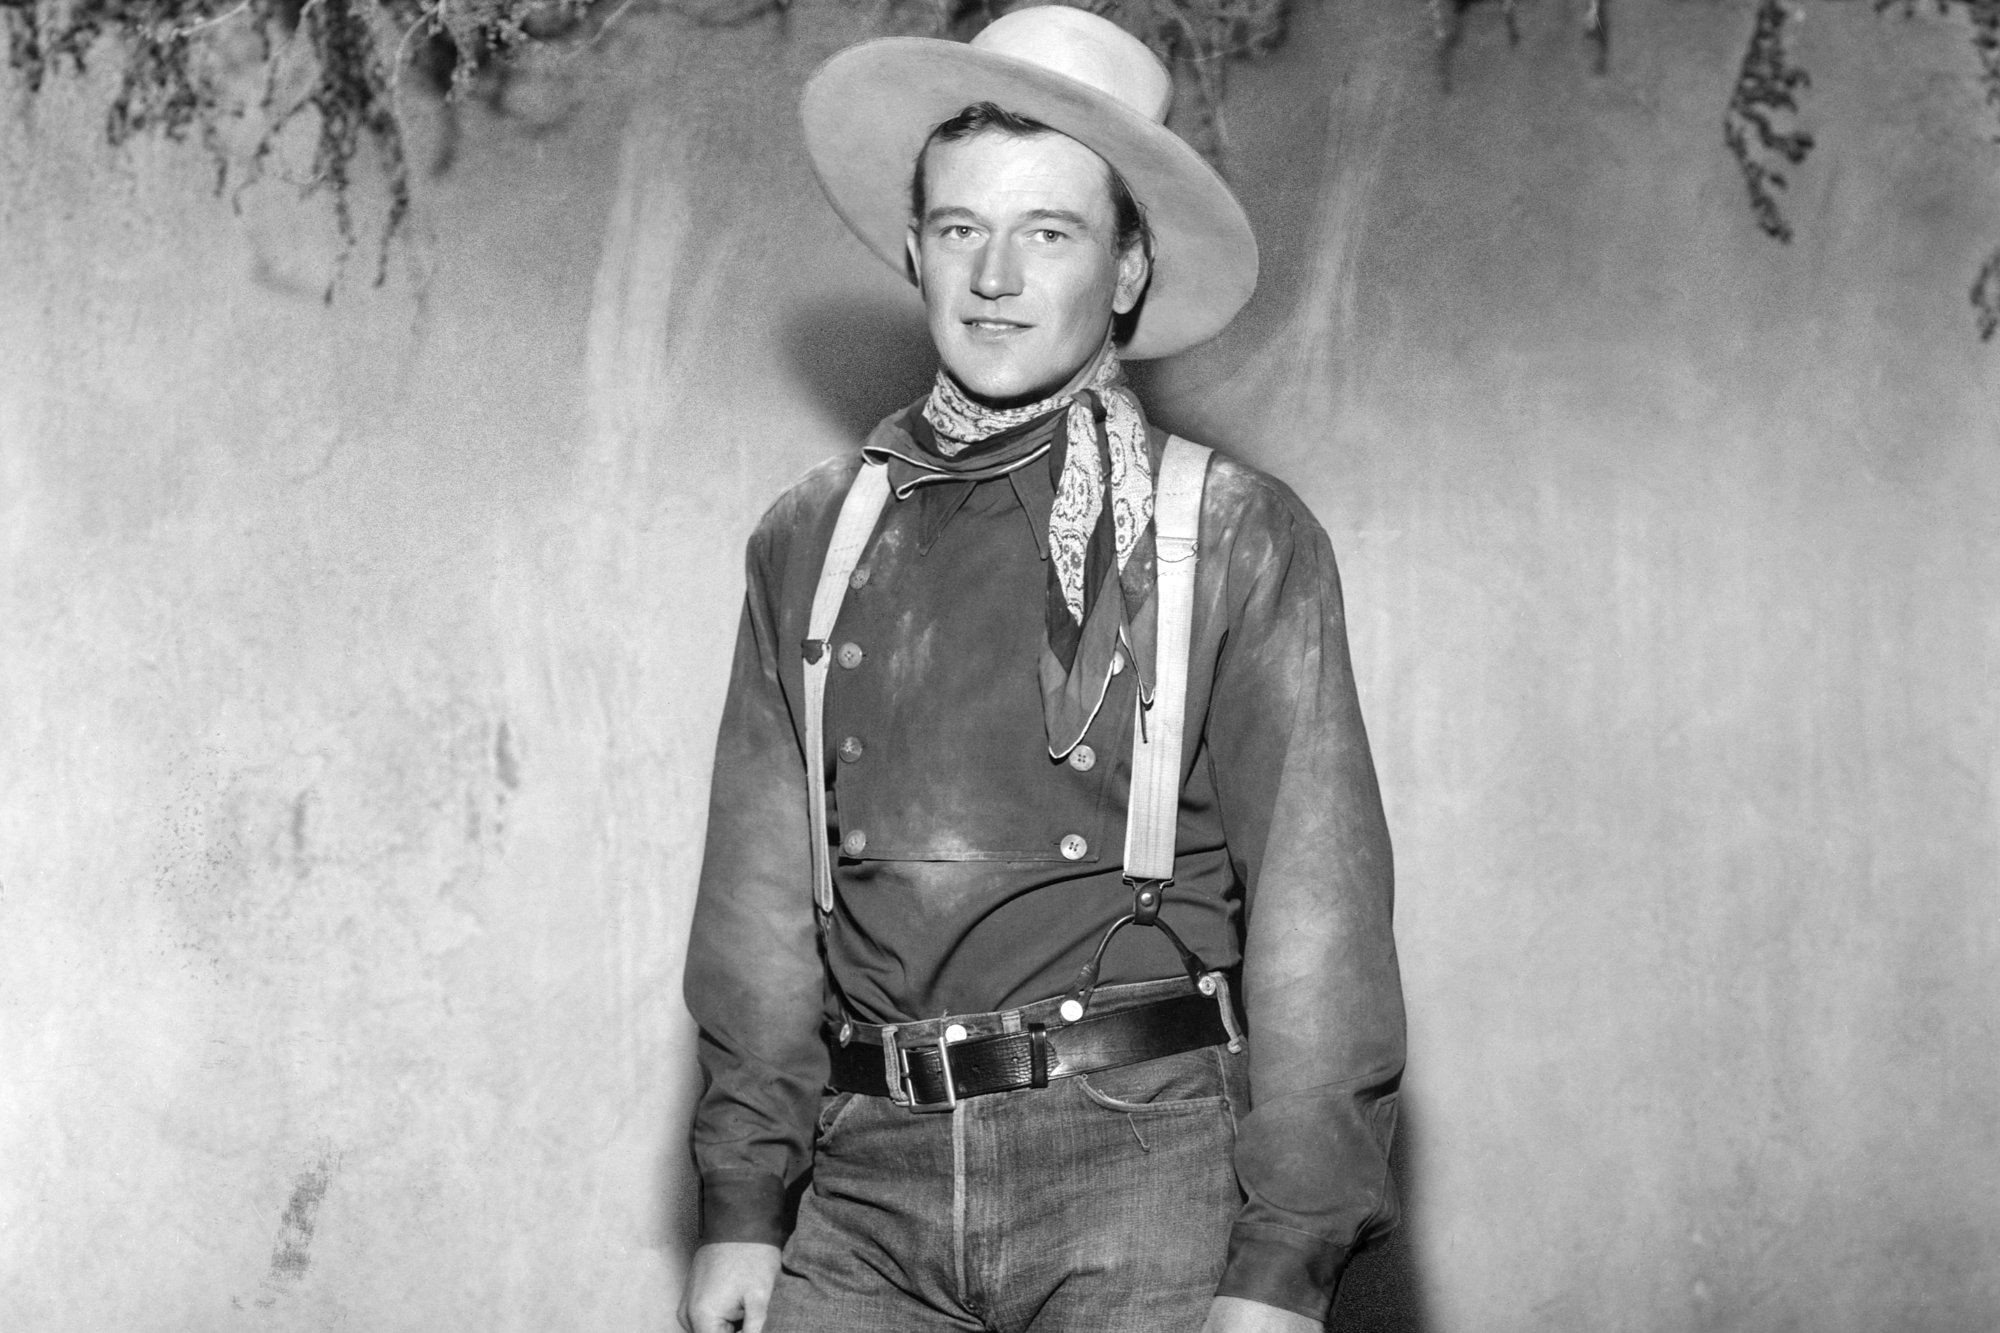 Movie star John Wayne wearing a Western cowboy outfit from 'Stagecoach'